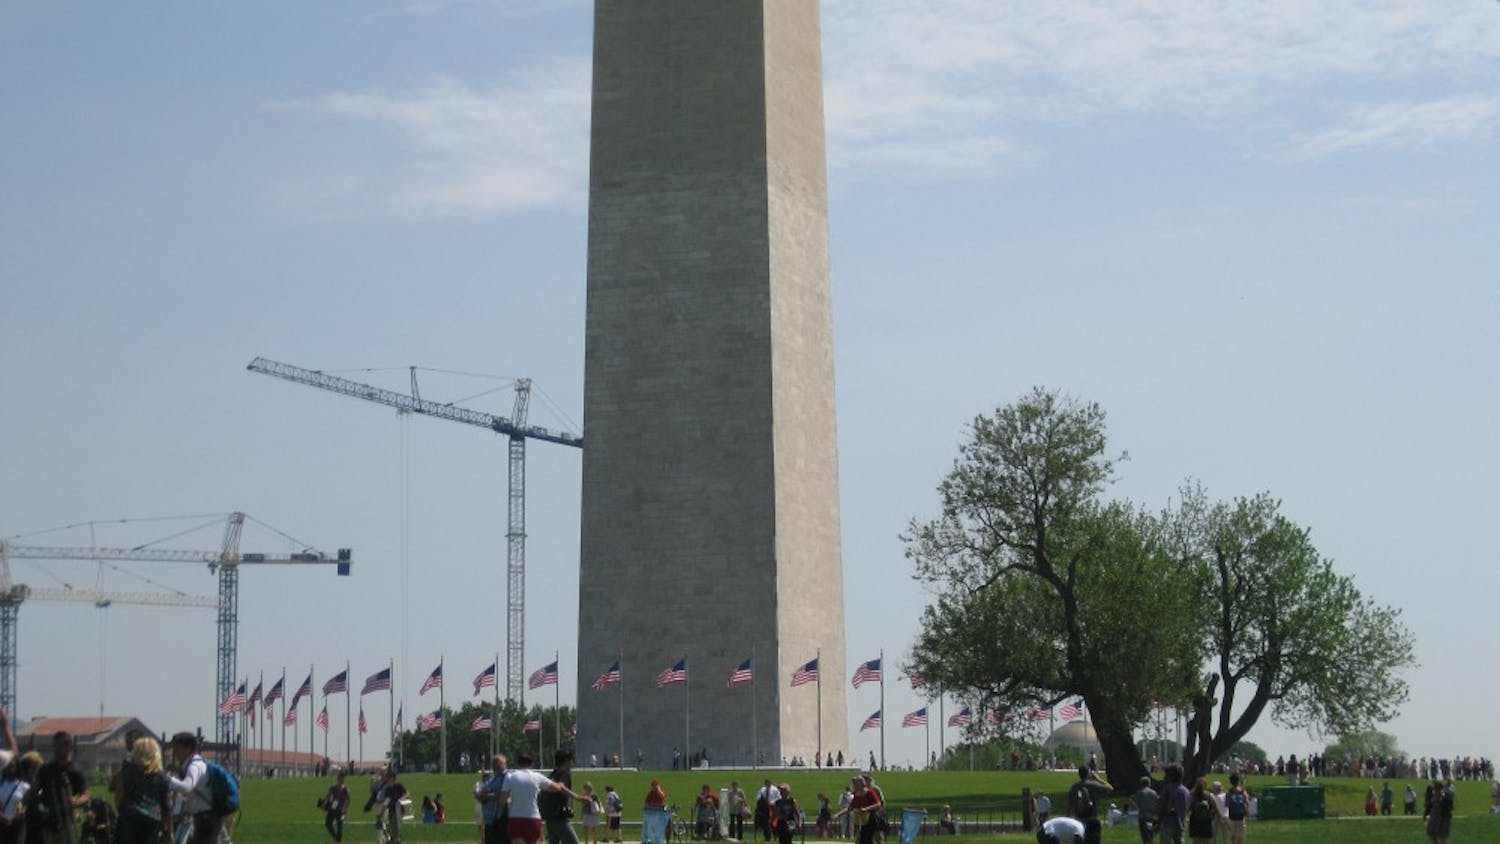 	Spectators prepare to enter the Washington Monument after the ceremony.